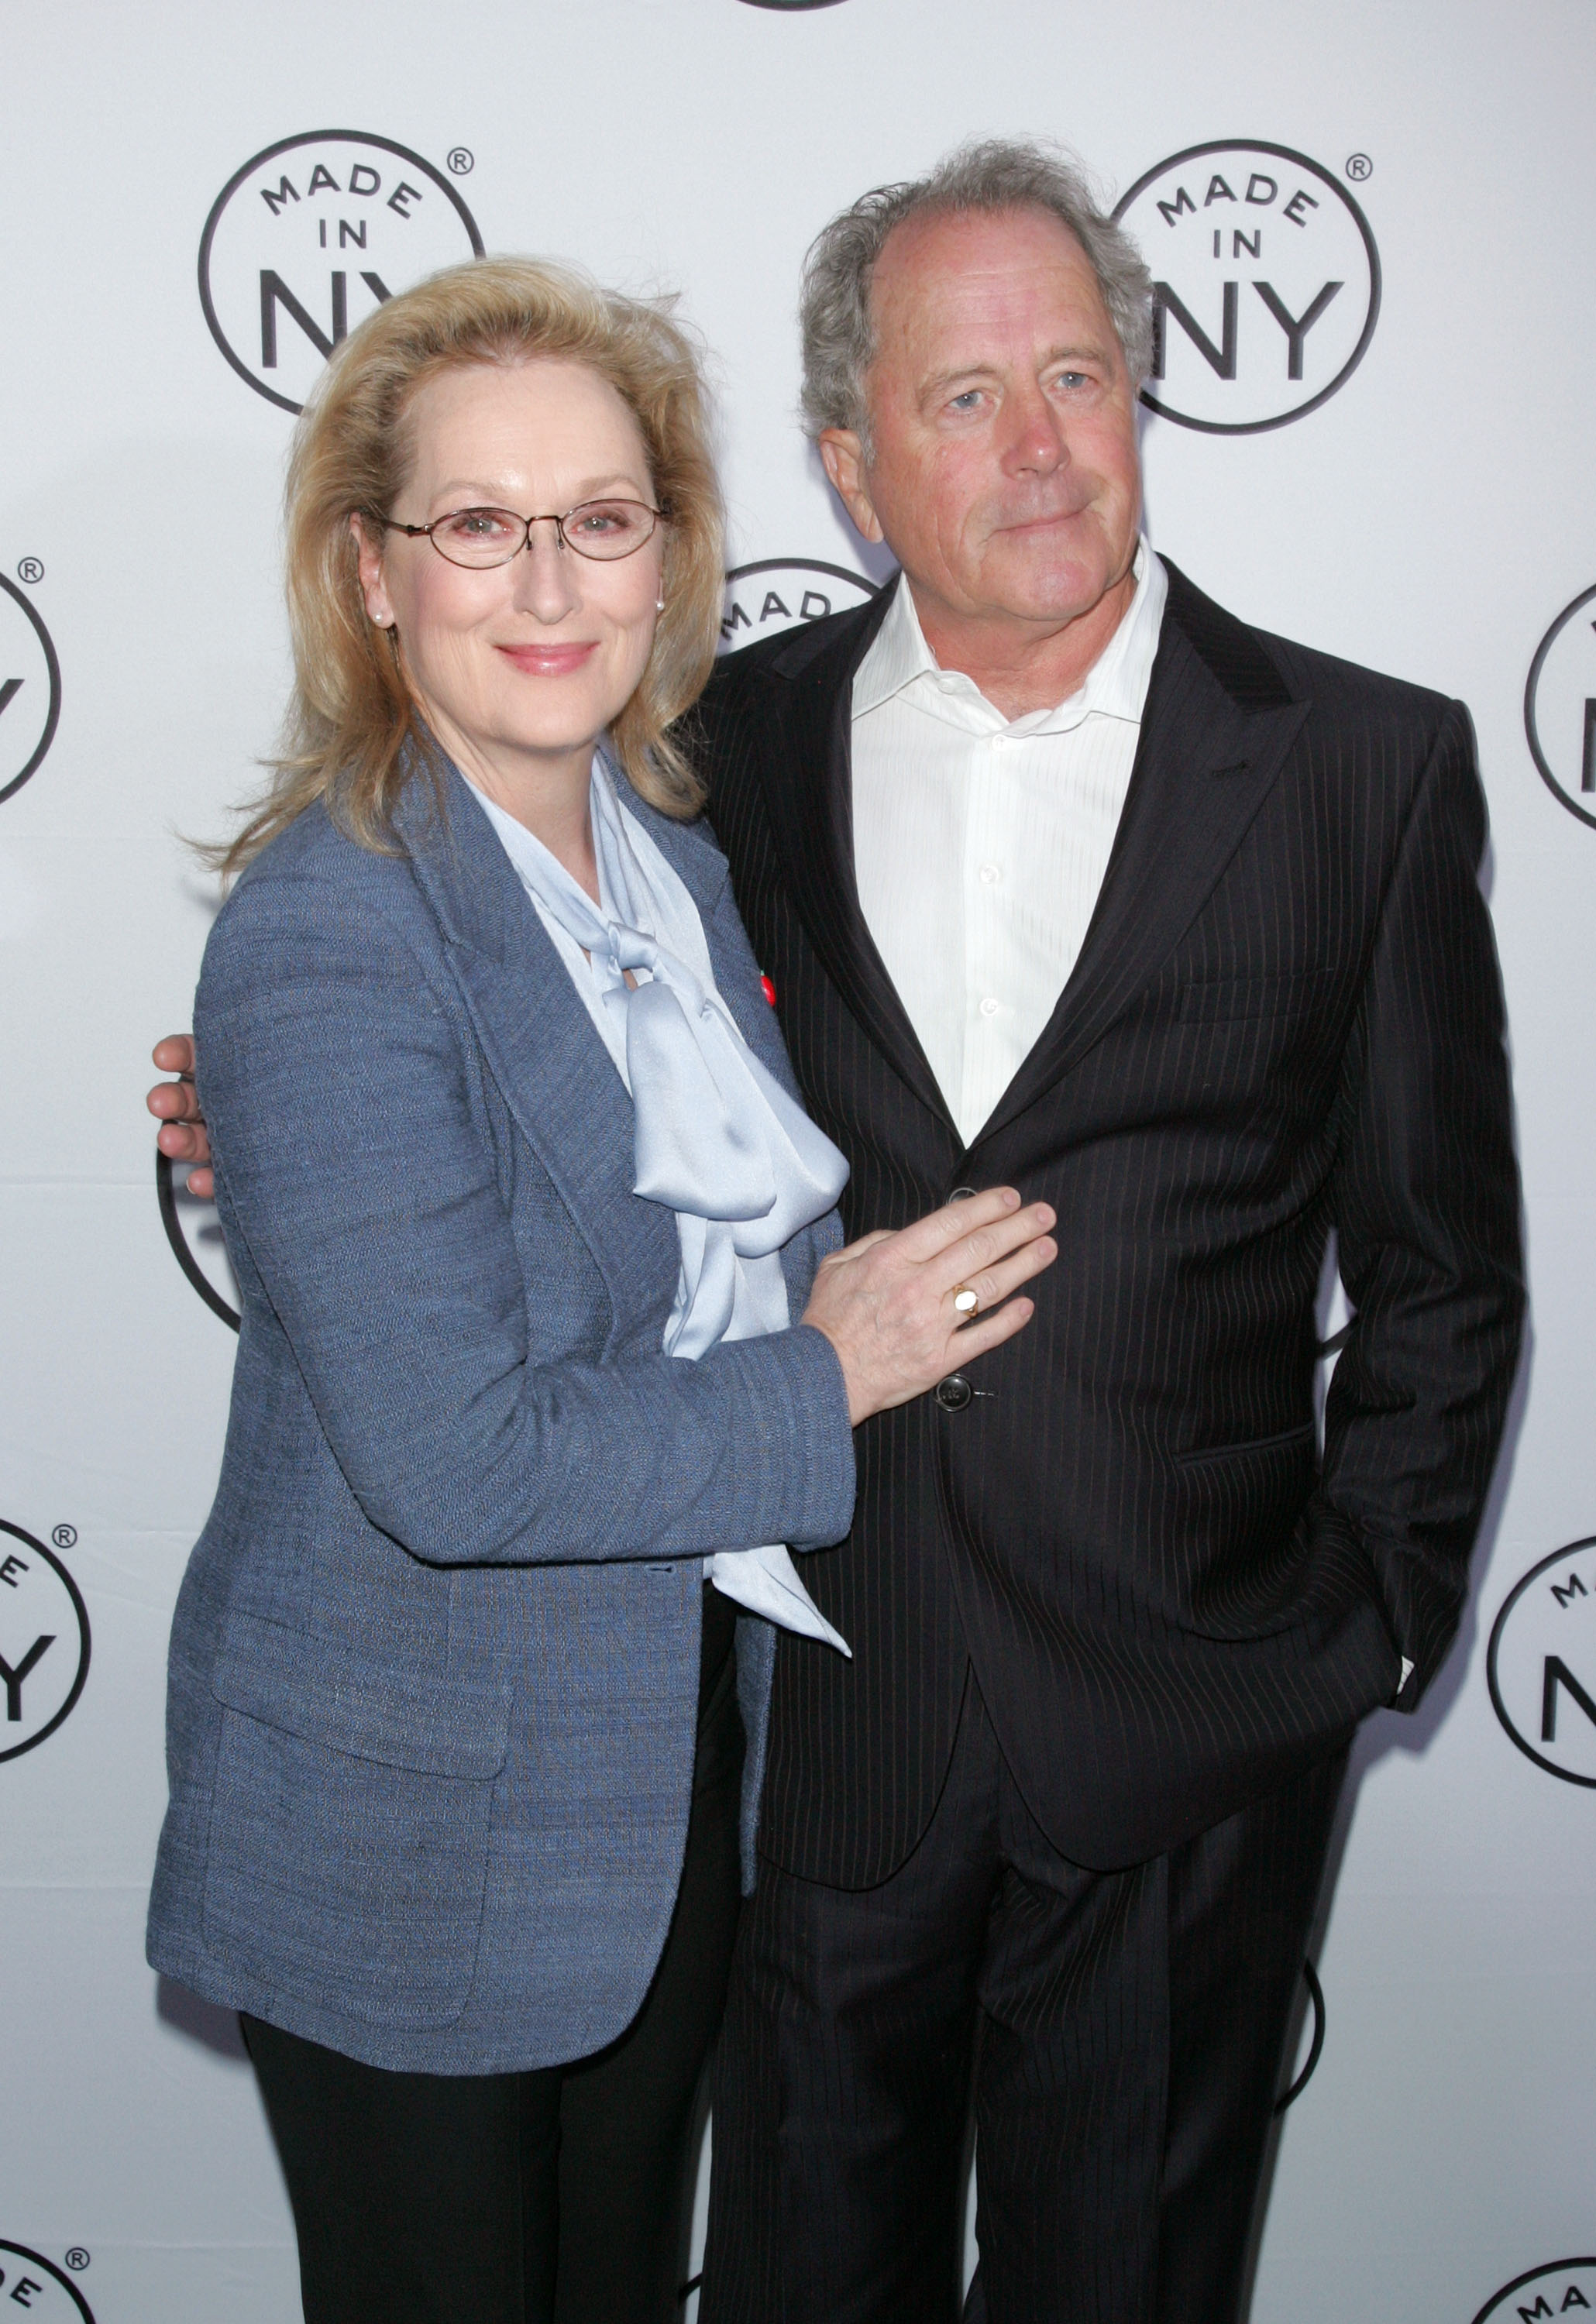 Meryl Streep and Don Gummer at the 2012 Made In NY Awards at Gracie Mansion on June 4, 2012 in New York City. | Source: Getty Images